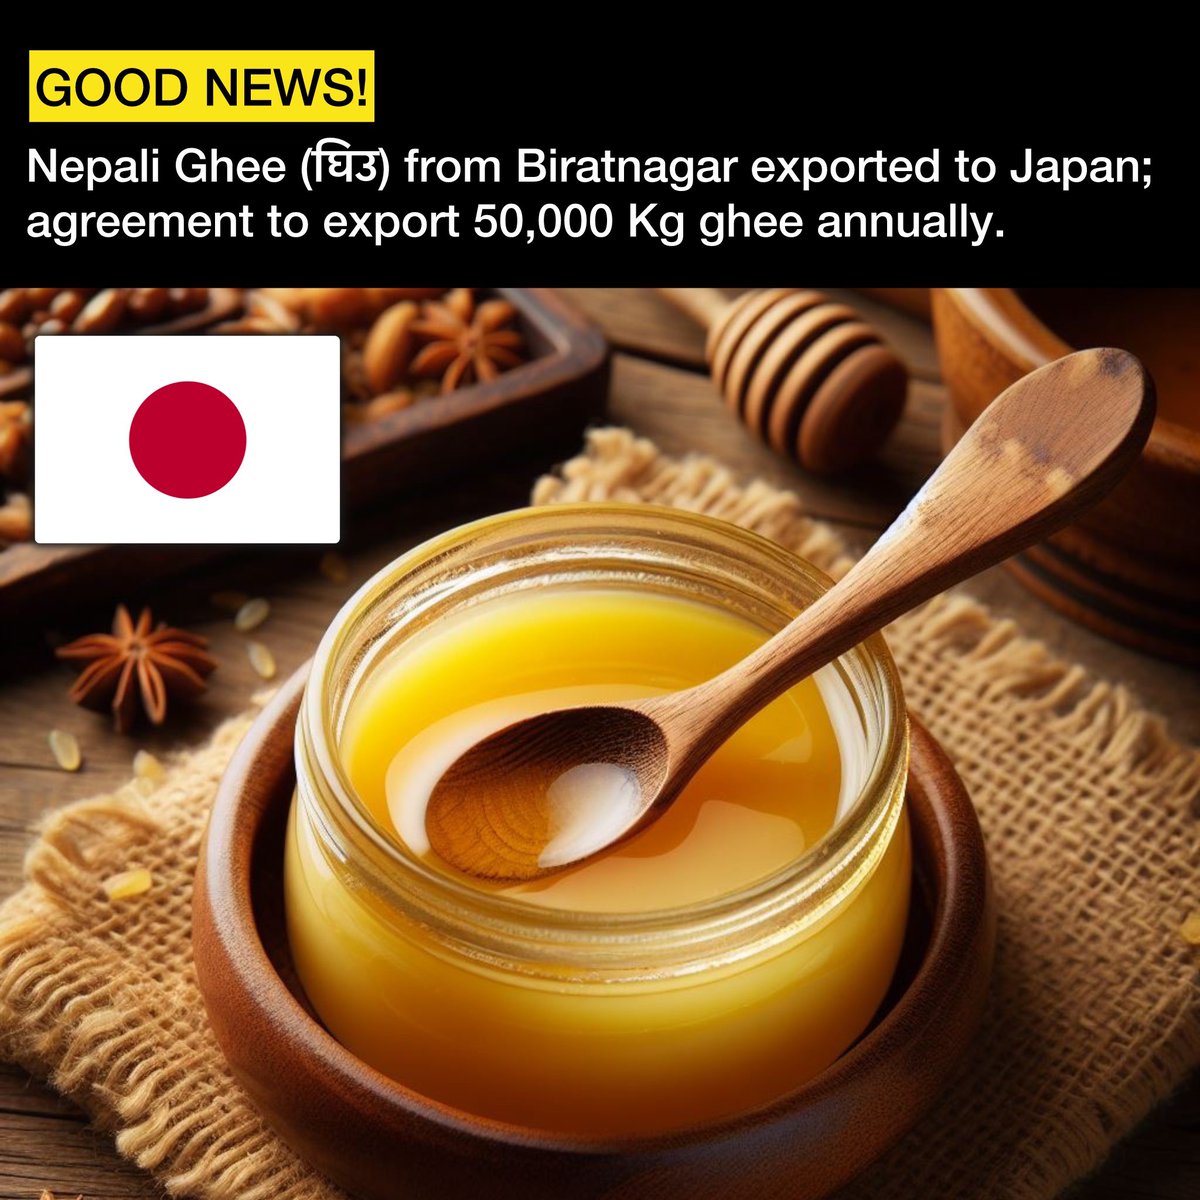 In a groundbreaking development for Nepal’s dairy industry, Nepali ghee (घिउ) from Biratnagar has secured a significant export agreement with Japan. Under this new deal, 50,000 kilograms of ghee produced by Suryadaya Milk and Beverage Industries will be shipped annually.